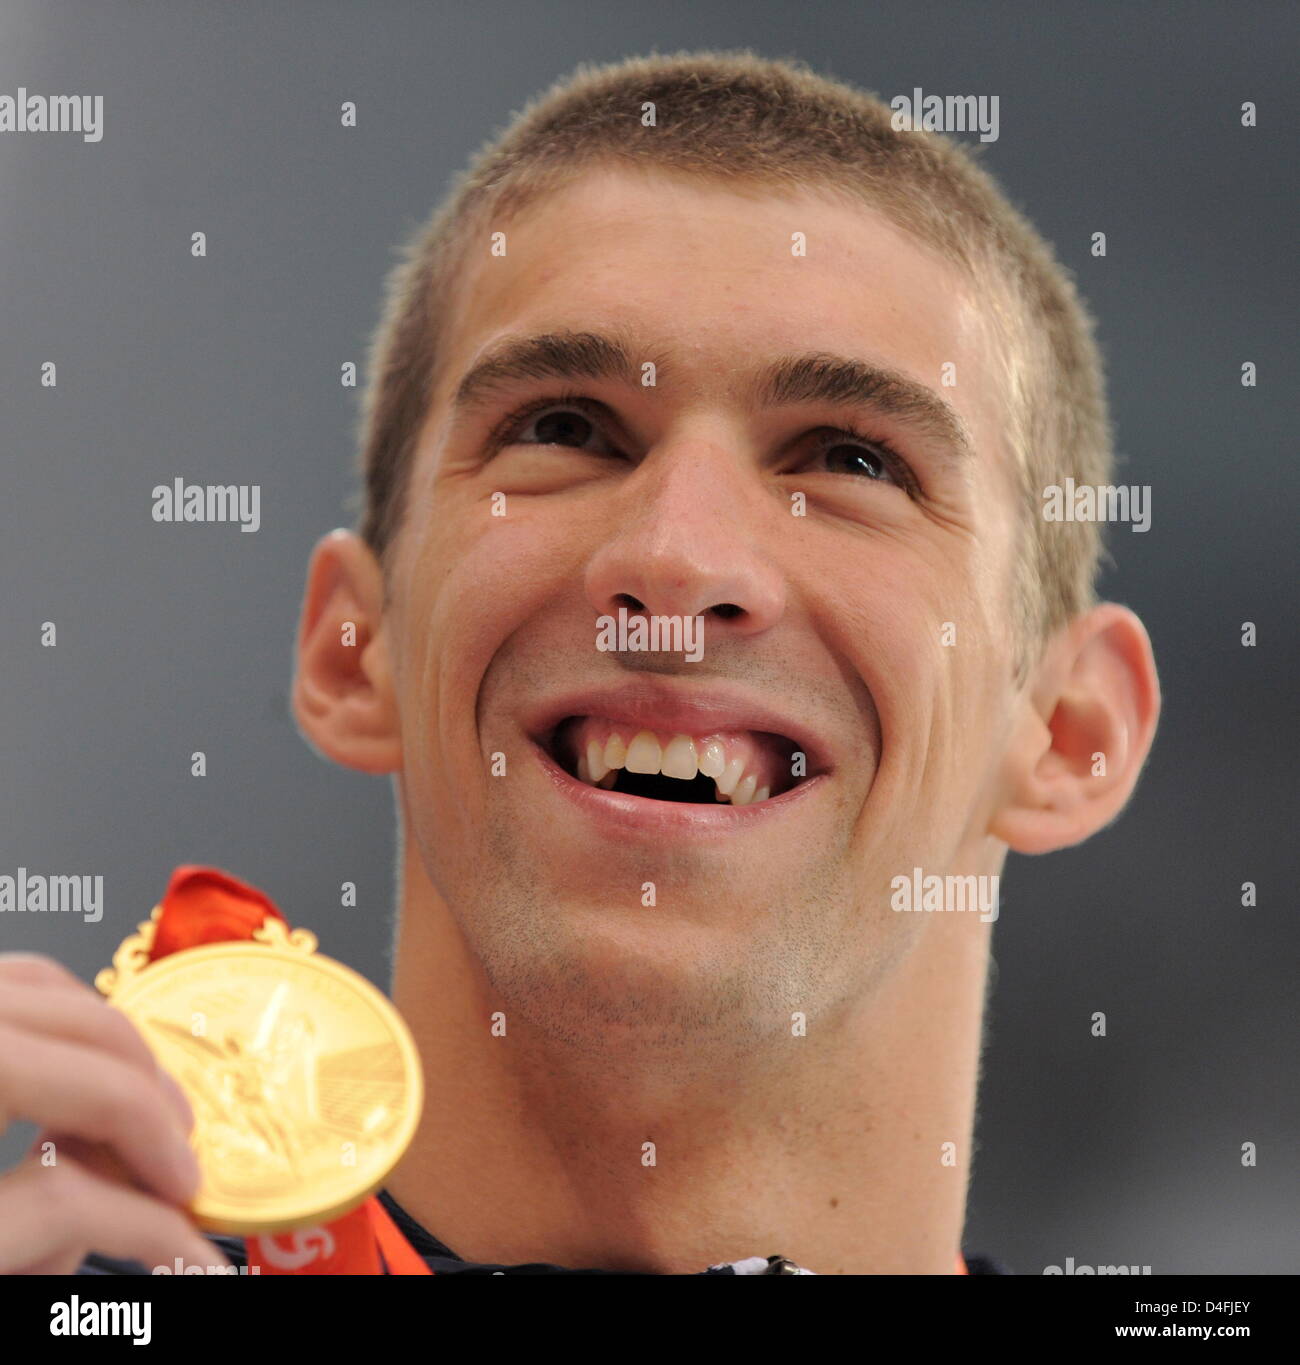 Goldmedallist Michael Phelps celebrates on the podium during the medal ceremony for the men's 400 M individual medley during the 2008 Olympics at the National Aquatics Center in Beijing, China 10 August 2008. Photo: Bernd Thissen dpa (c) dpa - Bildfunk Stock Photo